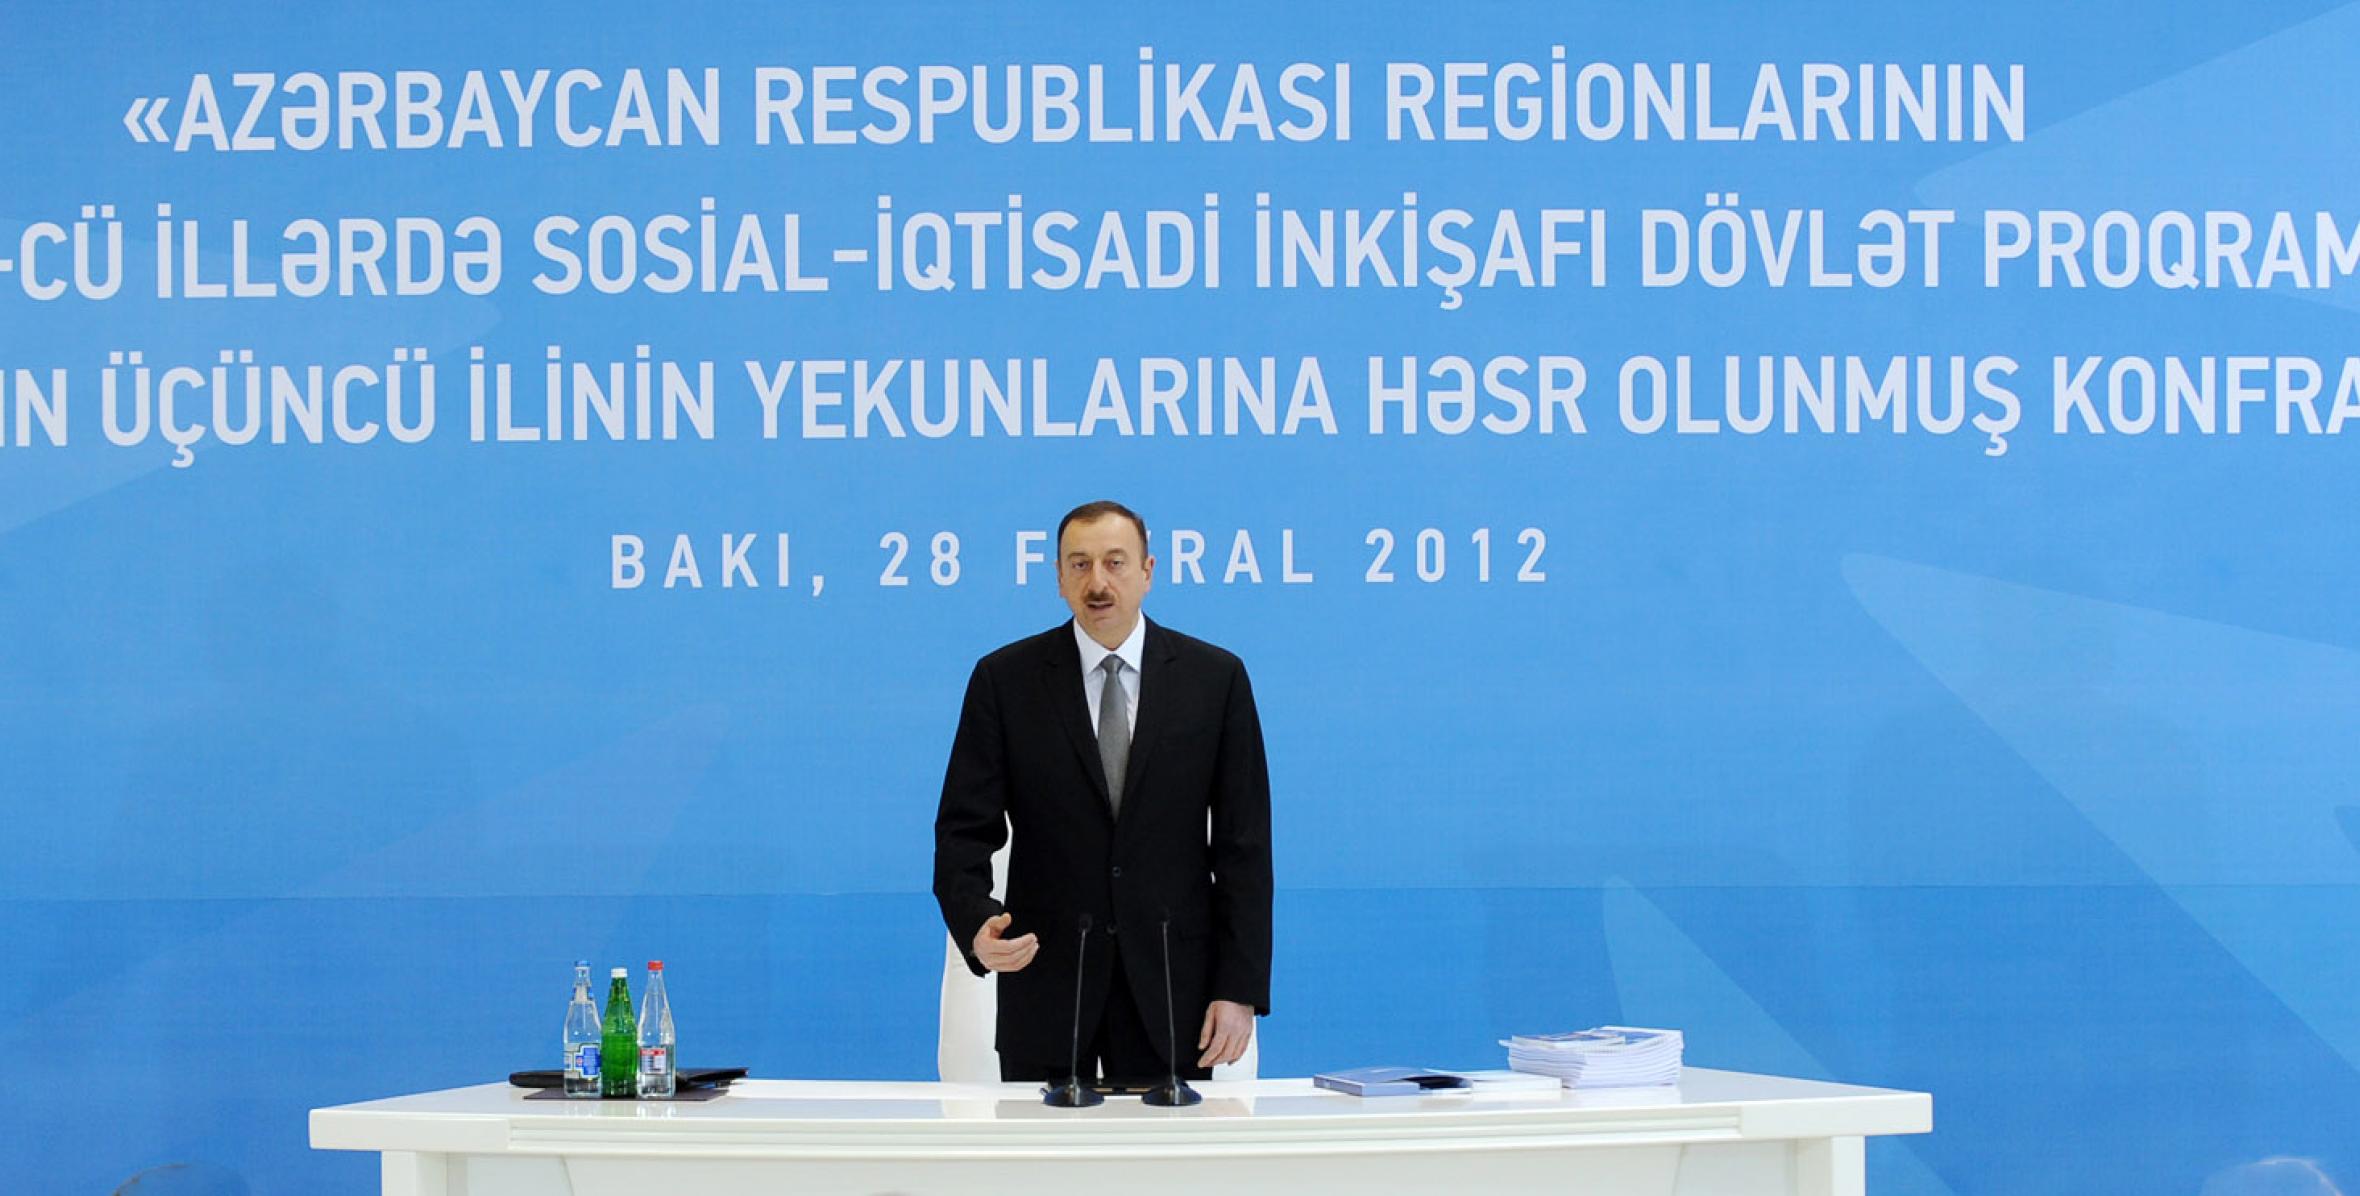 Opening speech by Ilham Aliyev at the conference on the results of the third year into the “State Program on the socioeconomic development of districts for 2009-2013”